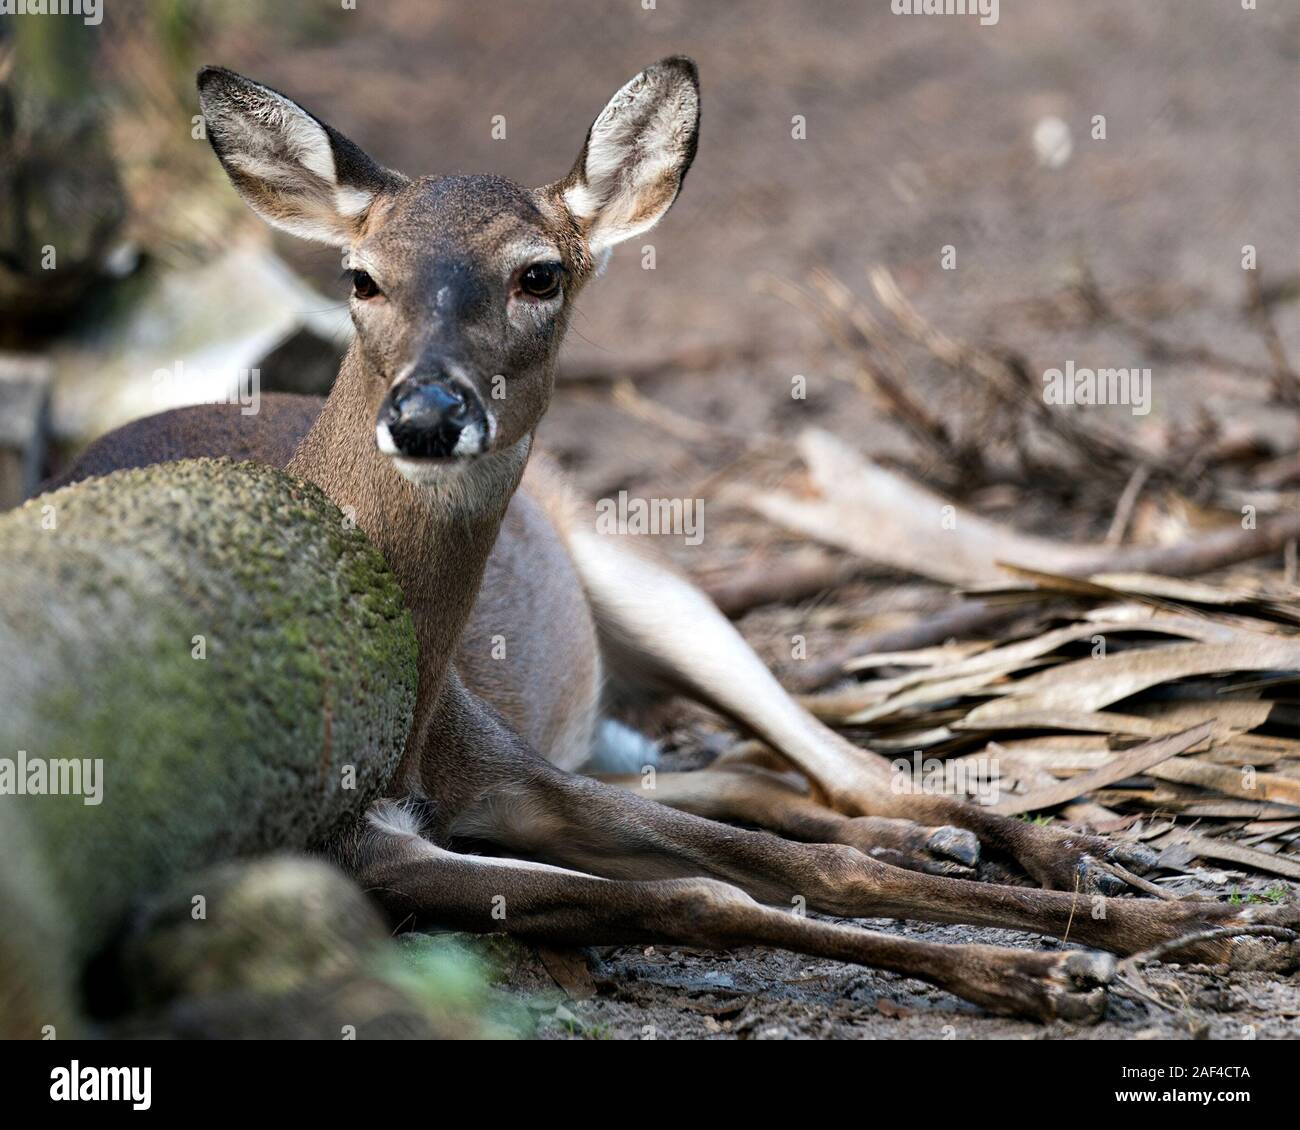 Deer (Florida Key Deer) animal close-up profile view looking at the camera resting displaying its head, ears, eyes, nose, legs with a foliage backgrou Stock Photo